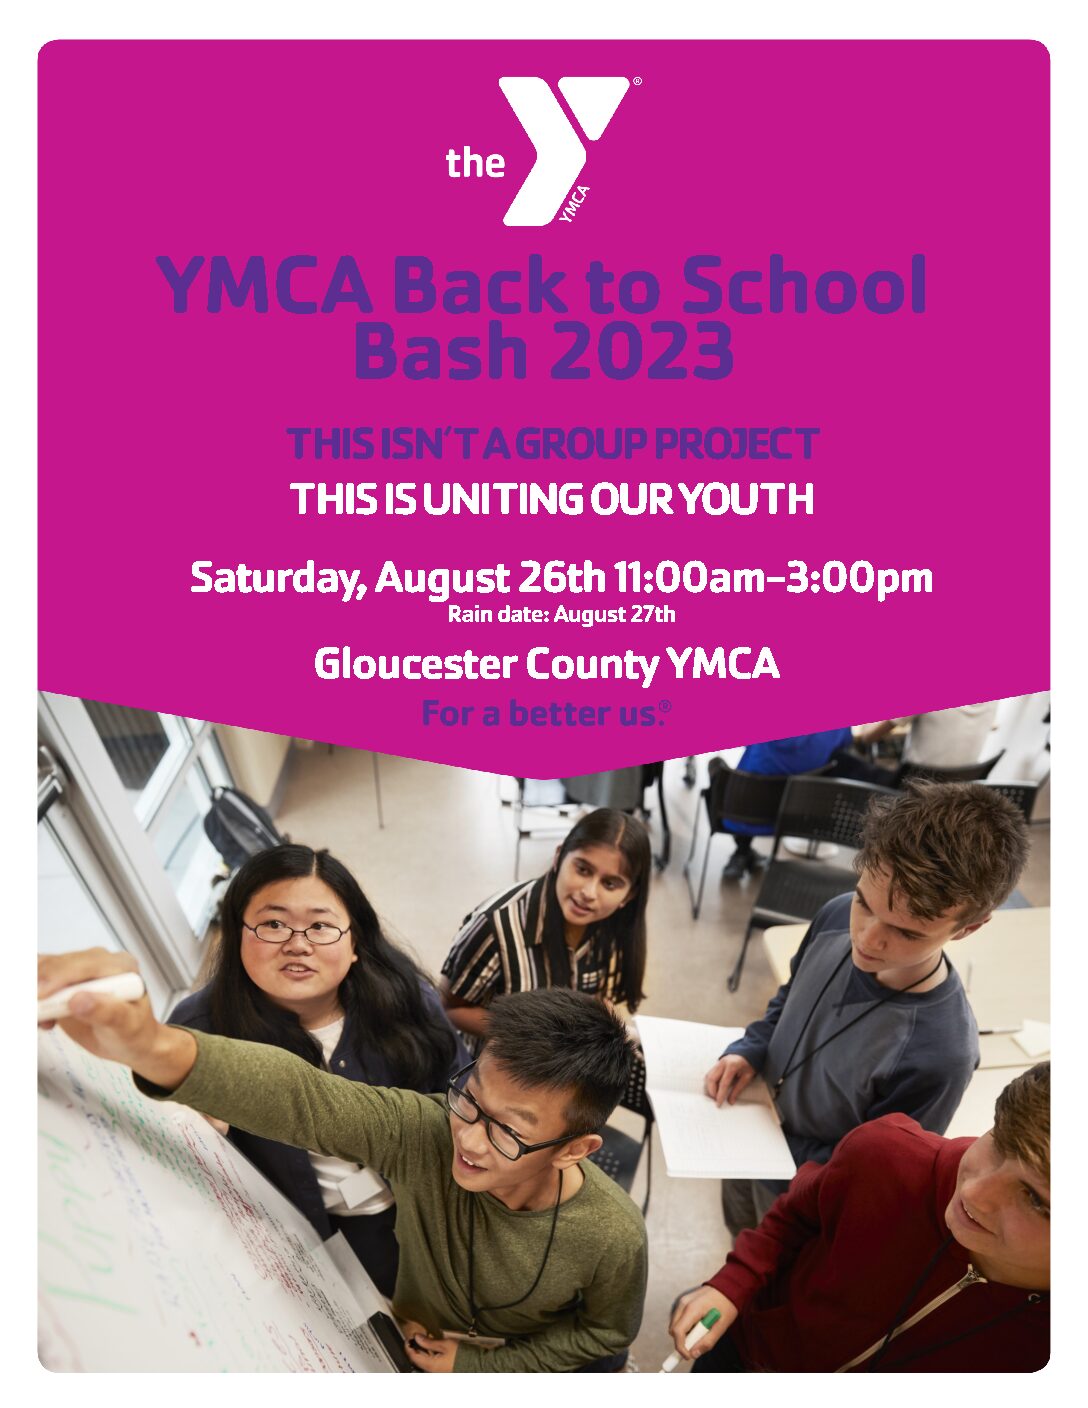 Back to School Bash Gloucester County YMCA